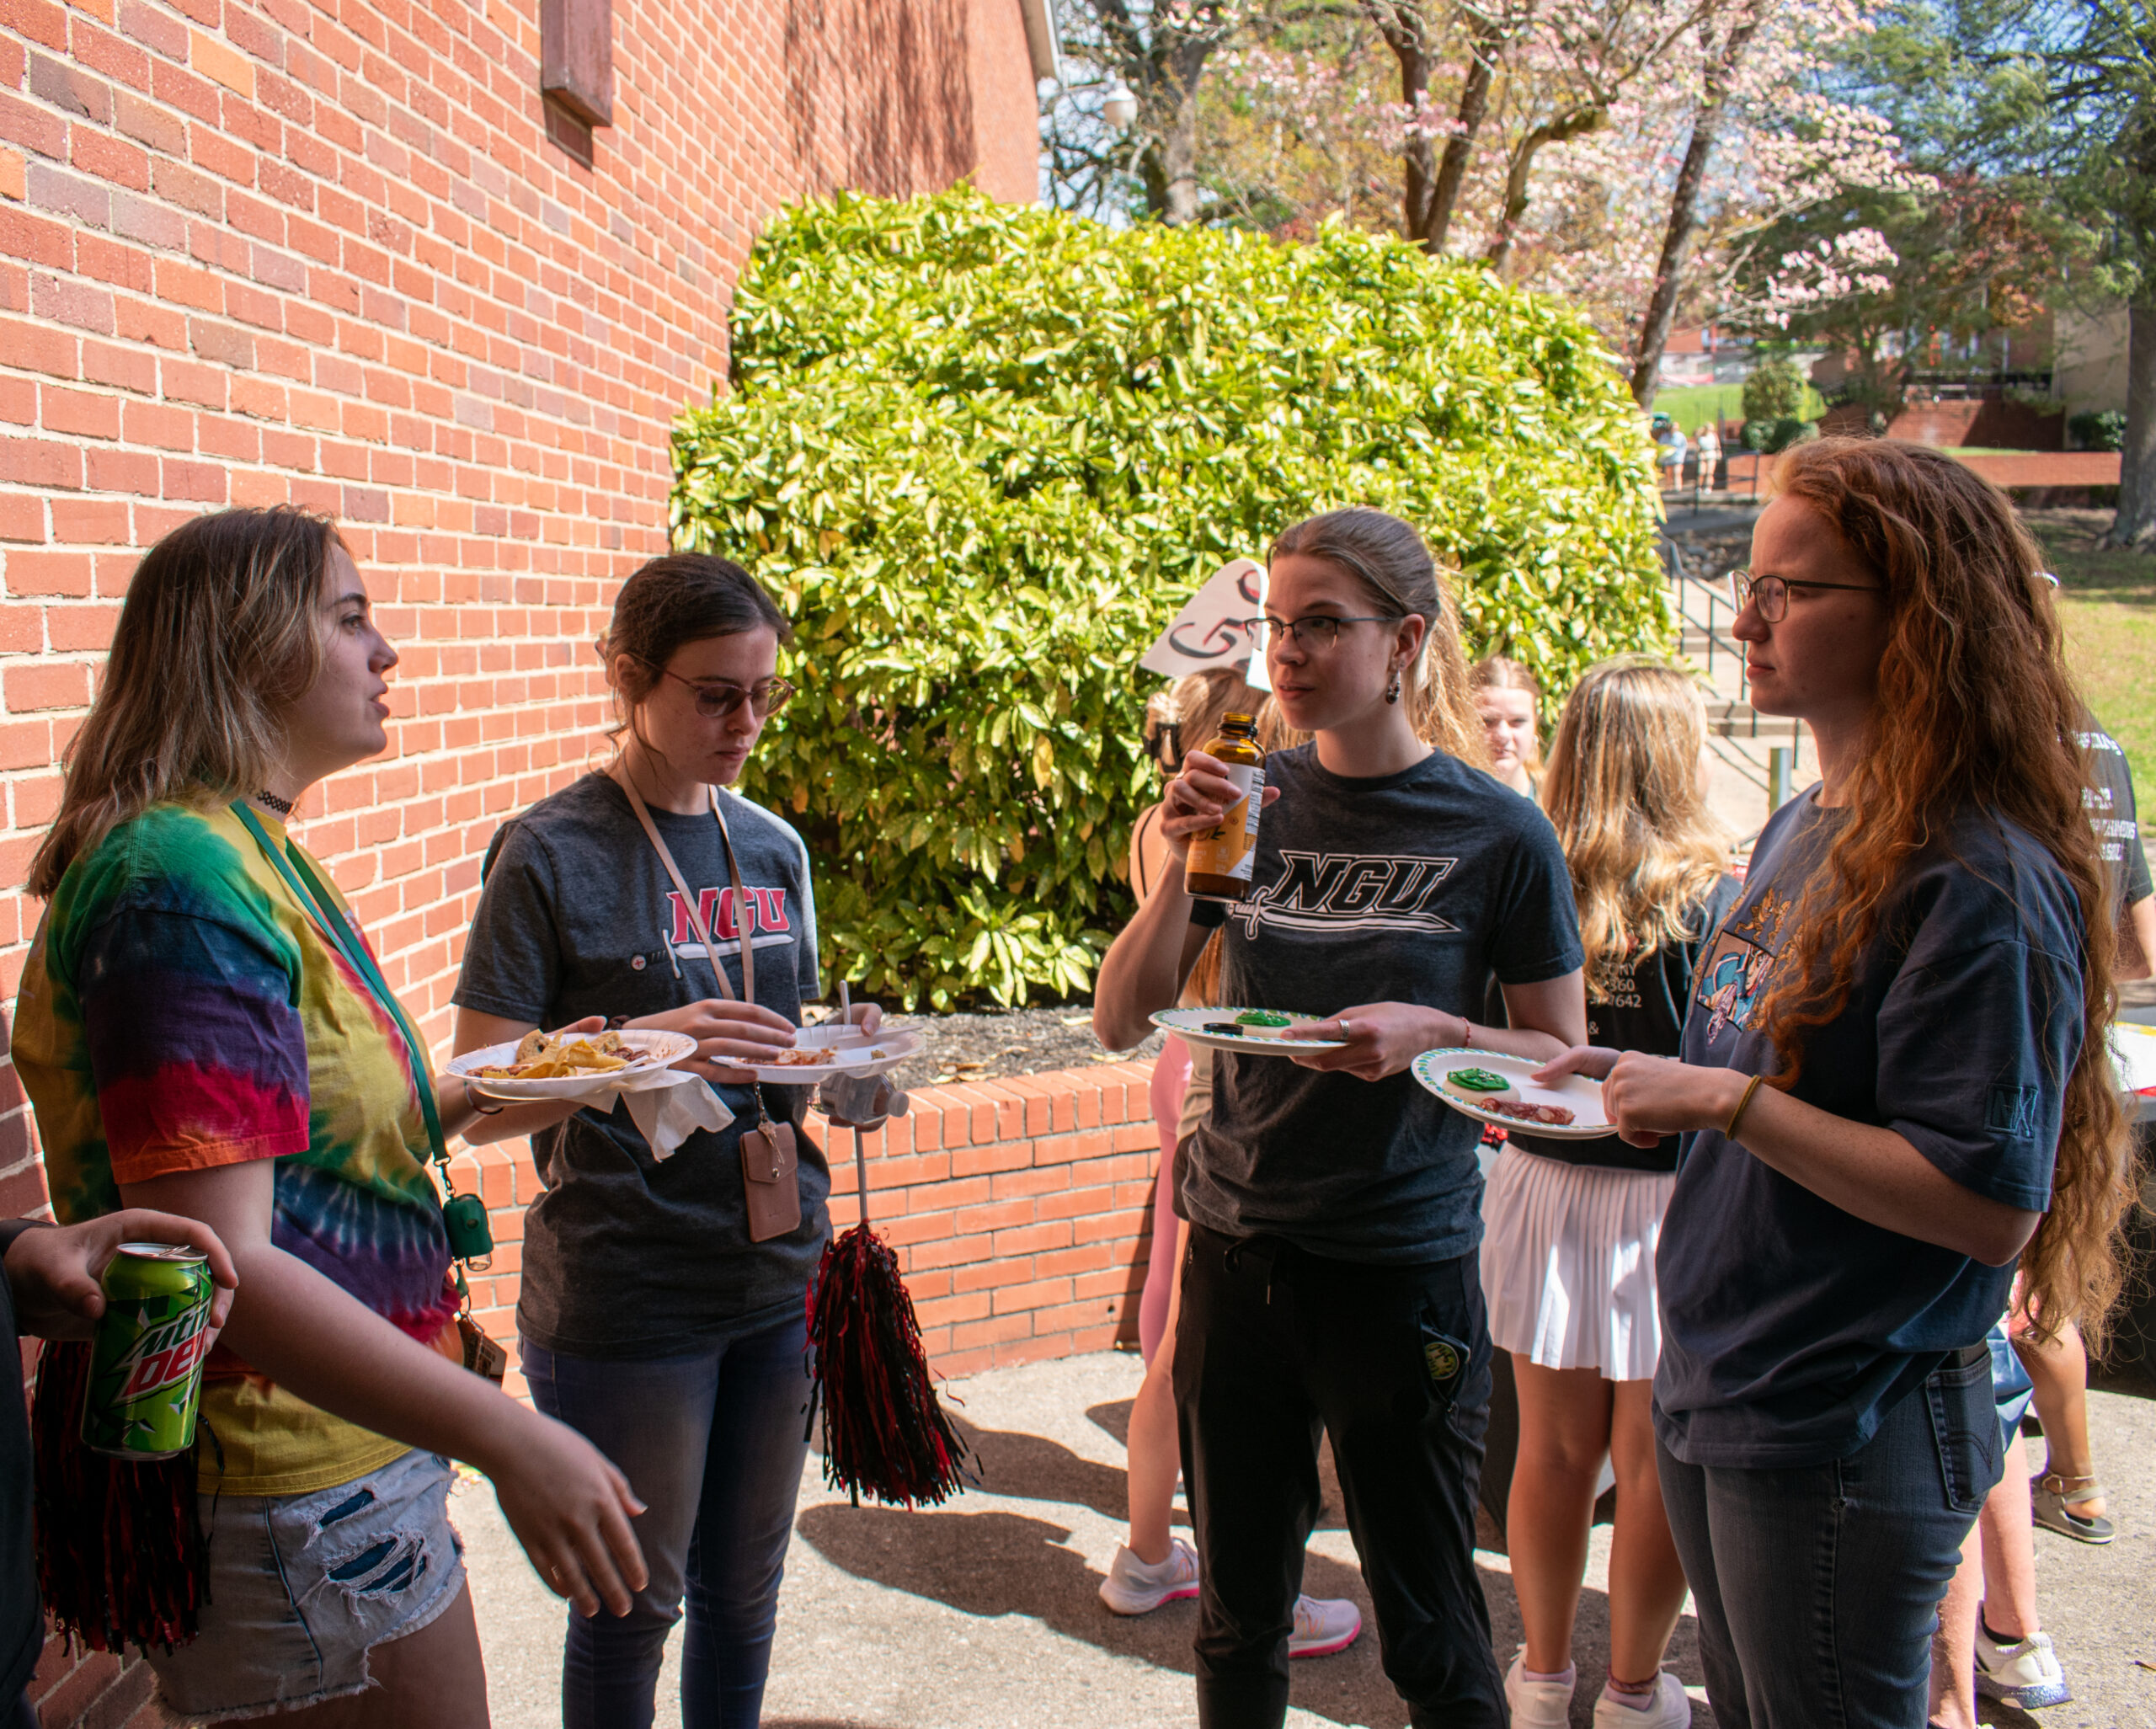 Check out some photos from NGU's men's volleyball tailgate.